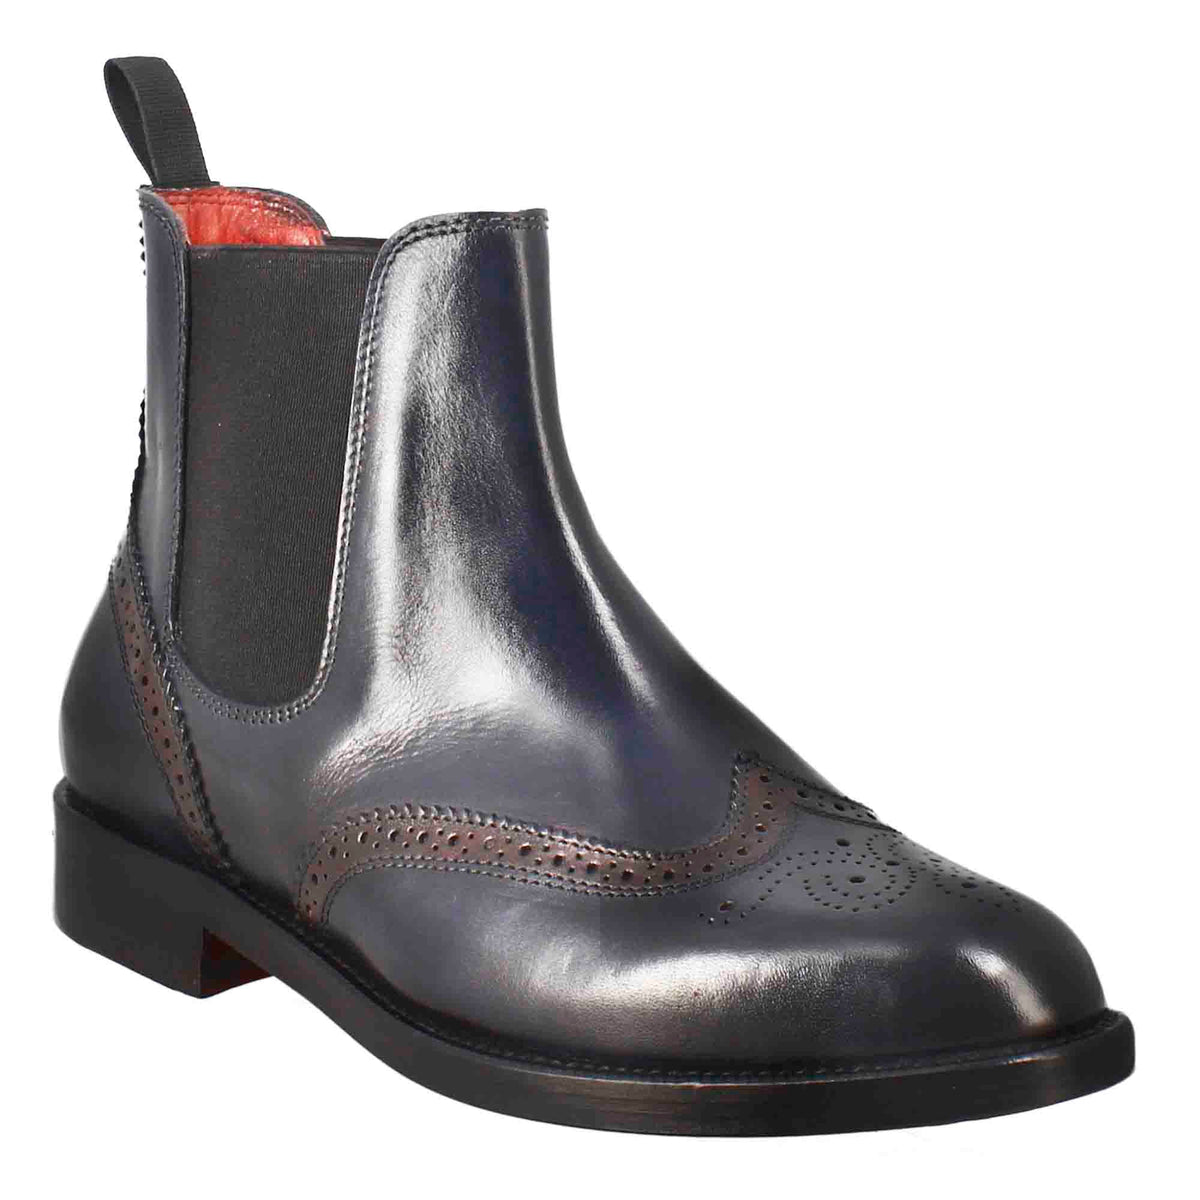 Women's Chelsea boot with brogue details in blue leather